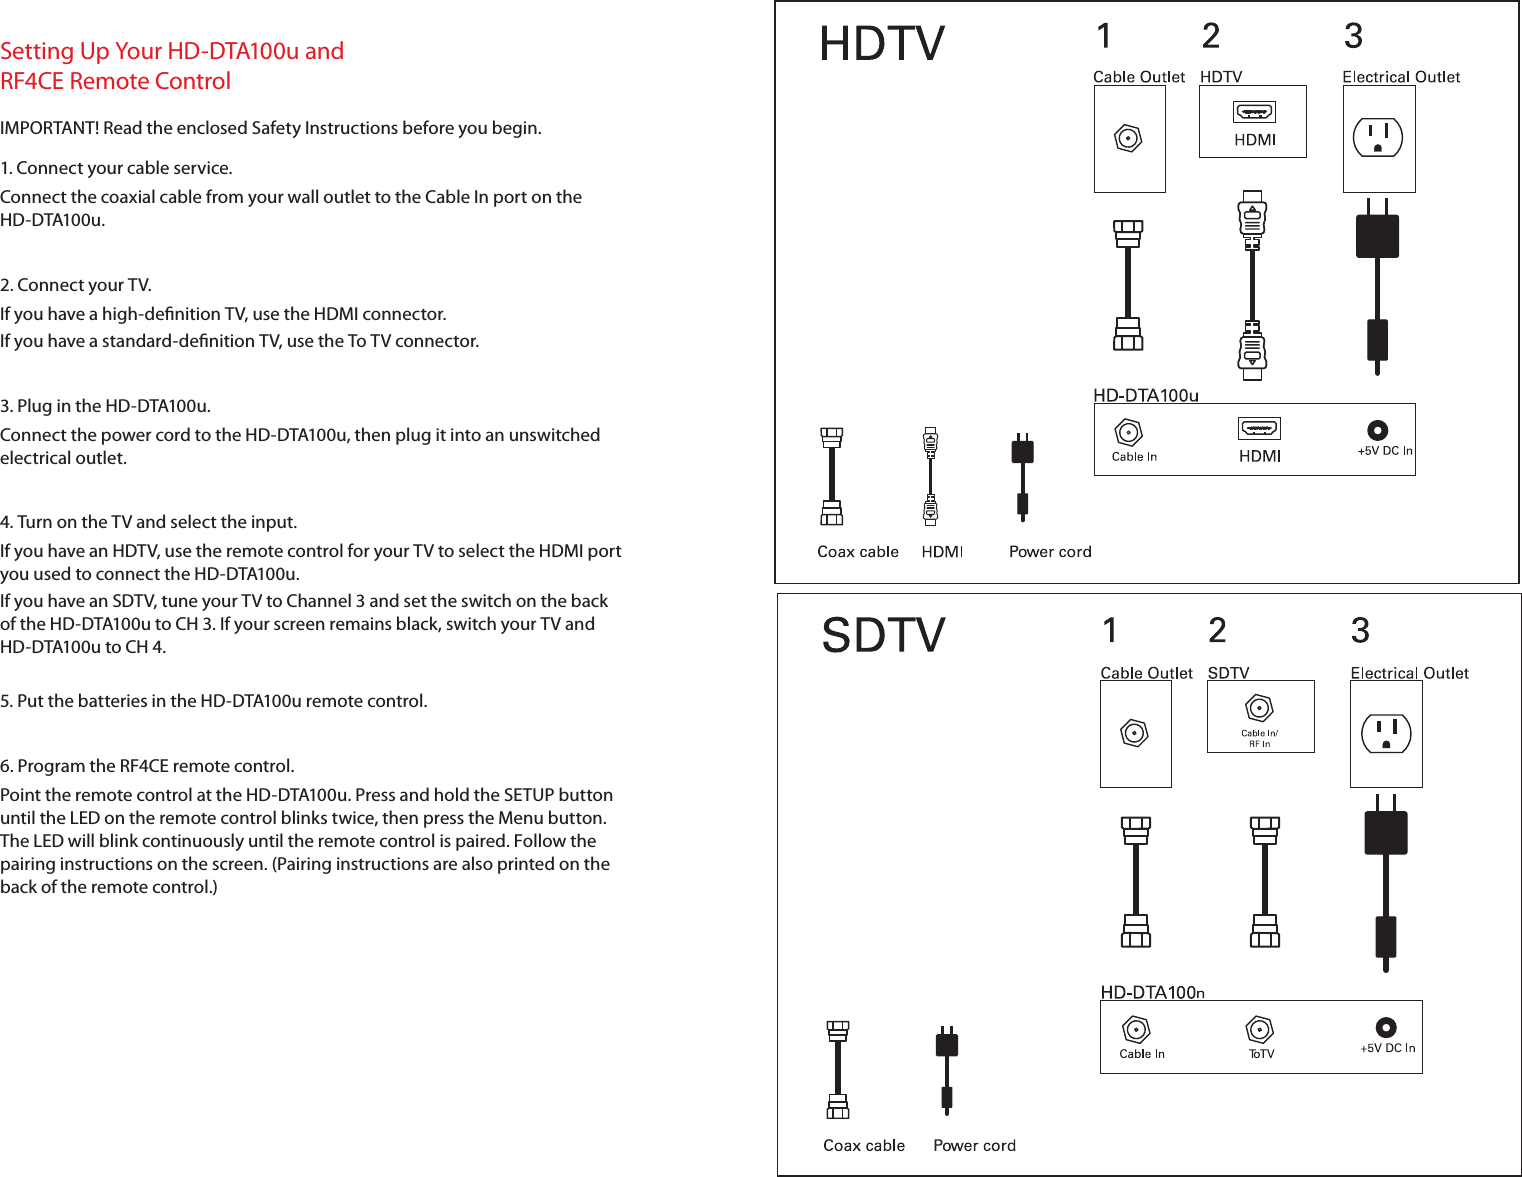 Setting Up Your HD-DTA100u and RF4CE Remote ControlIMPORTANT! Read the enclosed Safety Instructions before you begin.1. Connect your cable service.Connect the coaxial cable from your wall outlet to the Cable In port on the  HD-DTA100u.2. Connect your TV.If you have a high-denition TV, use the HDMI connector.If you have a standard-denition TV, use the To TV connector.3. Plug in the HD-DTA100u.Connect the power cord to the HD-DTA100u, then plug it into an unswitched electrical outlet.4. Turn on the TV and select the input.If you have an HDTV, use the remote control for your TV to select the HDMI port you used to connect the HD-DTA100u.If you have an SDTV, tune your TV to Channel3 and set the switch on the back of the HD-DTA100u to CH3. If your screen remains black, switch your TV and HD-DTA100u to CH 4.5. Put the batteries in the HD-DTA100u remote control.6. Program the RF4CE remote control.Point the remote control at the HD-DTA100u. Press and hold the SETUP button until the LED on the remote control blinks twice, then press the Menu button. The LED will blink continuously until the remote control is paired. Follow the pairing instructions on the screen. (Pairing instructions are also printed on the back of the remote control.)